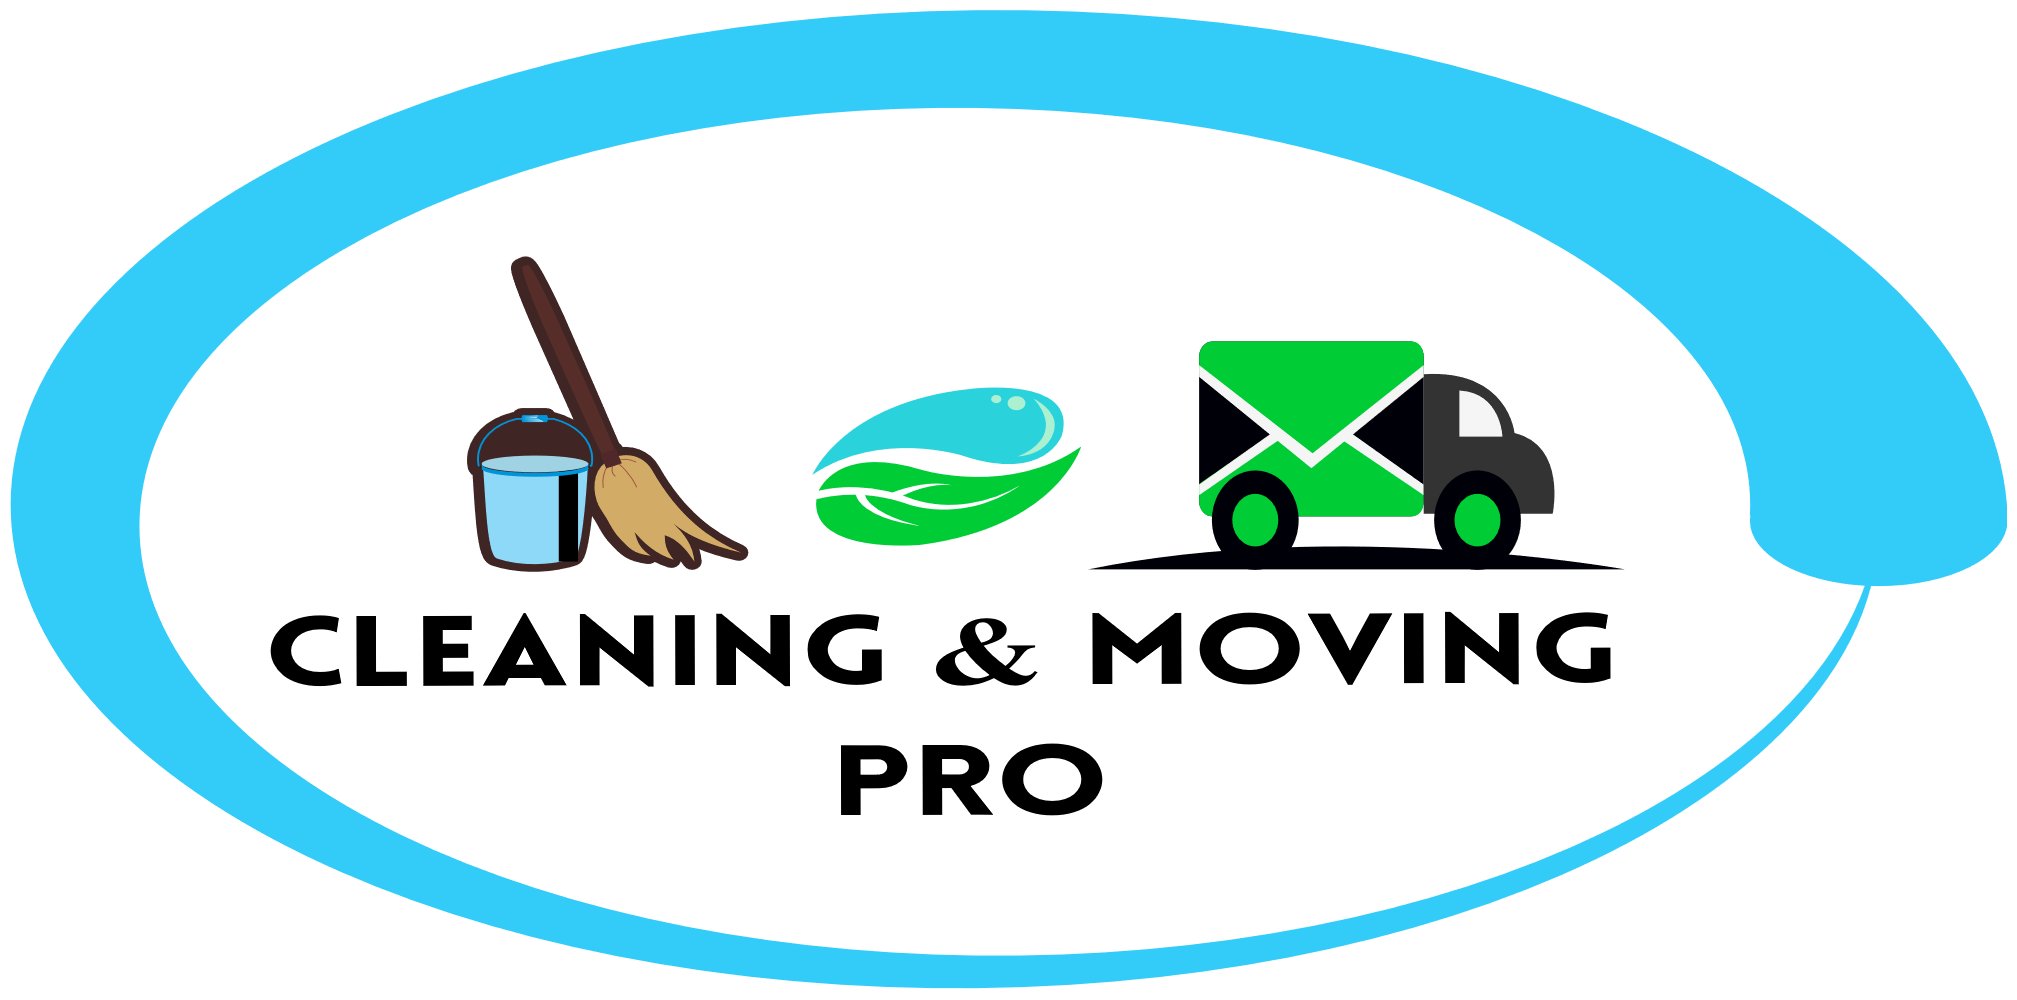 Professional Cleaning Services for Entertainment Venues in Ireland.-CLEANING AND MOVING PRO